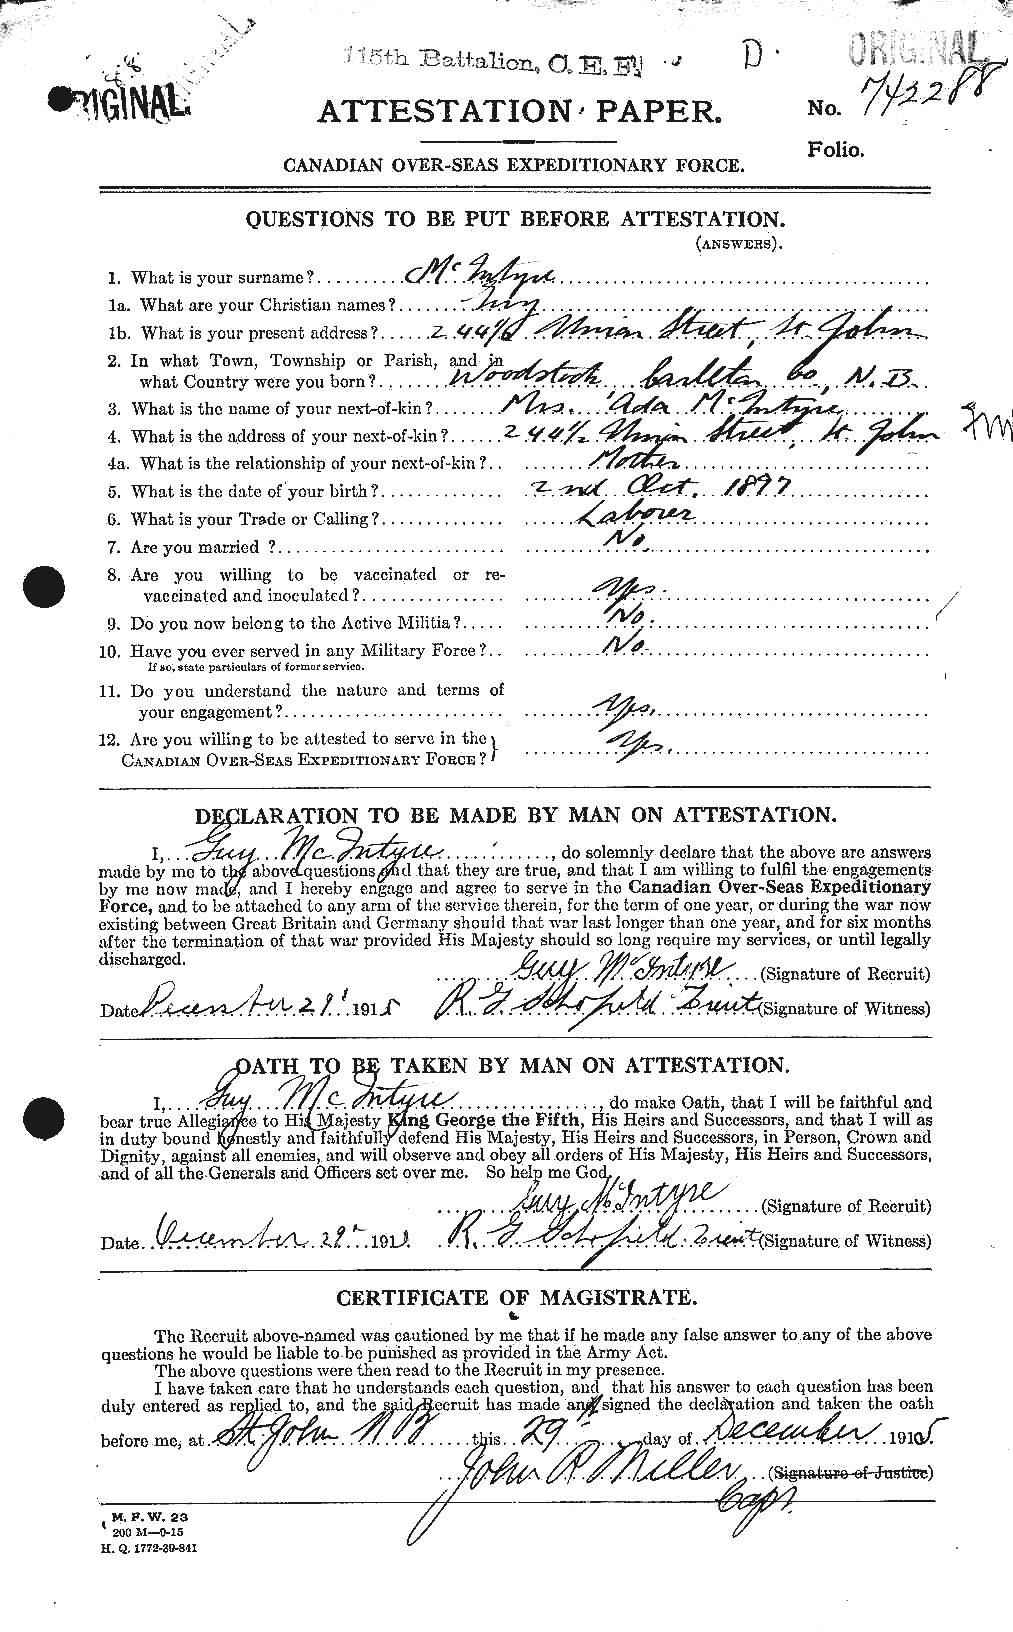 Personnel Records of the First World War - CEF 527402a